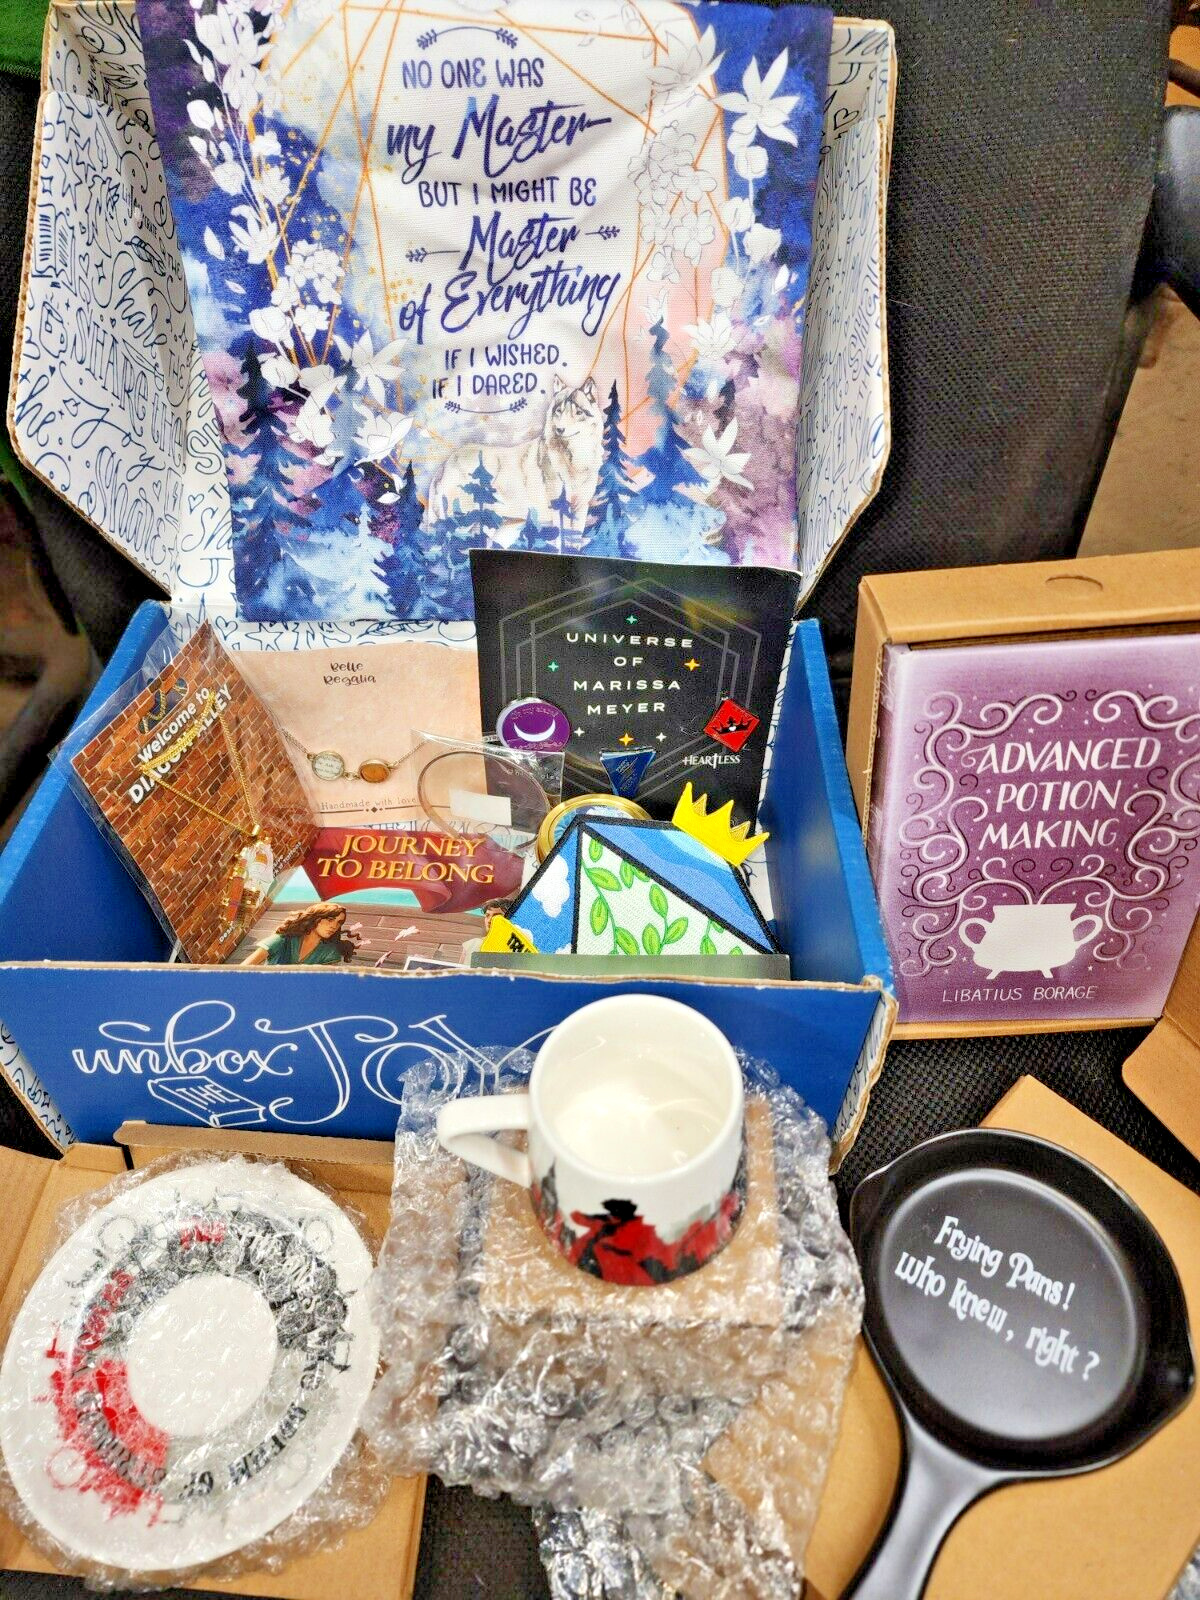 Fae-Crate Owl-crate Book box Full of gifts & collectibles from multiple boxes.